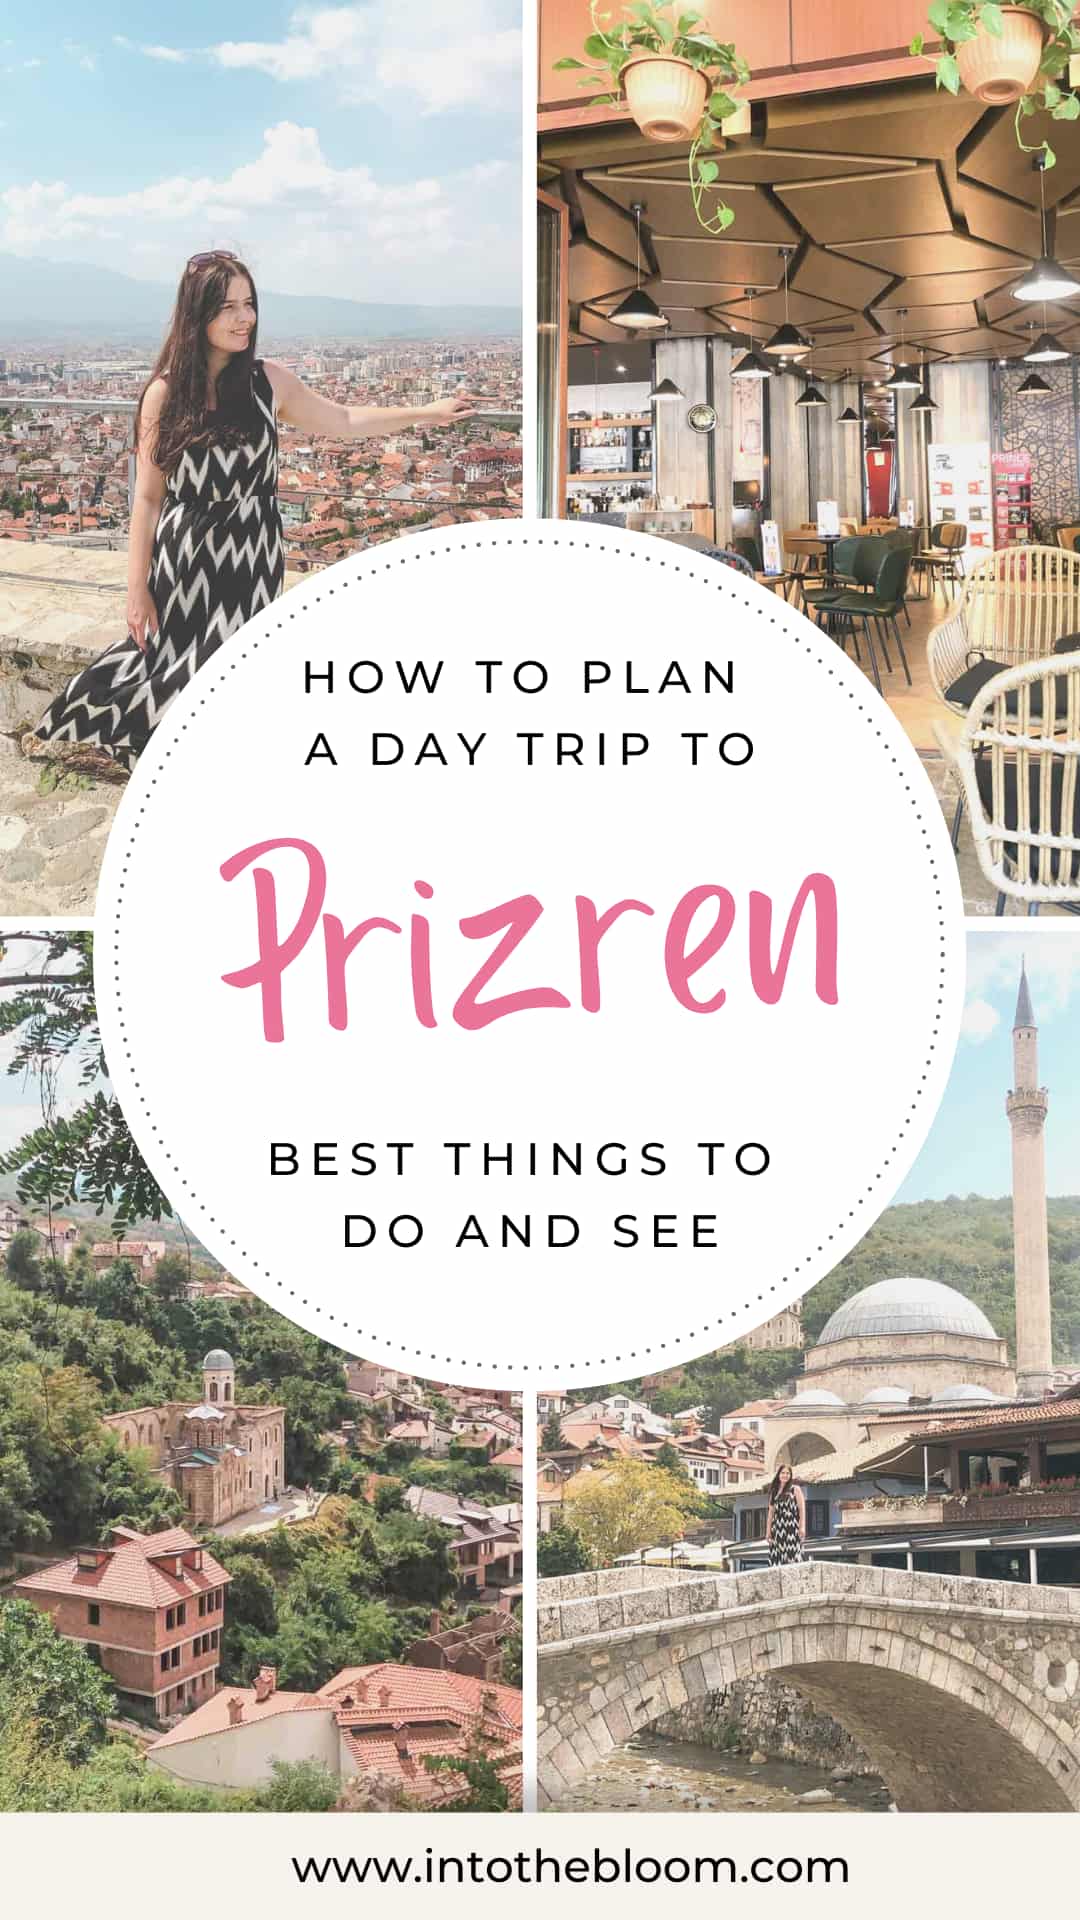 How to plan a day trip from Pristina to Prizren, Kosovo - Best things to do and see